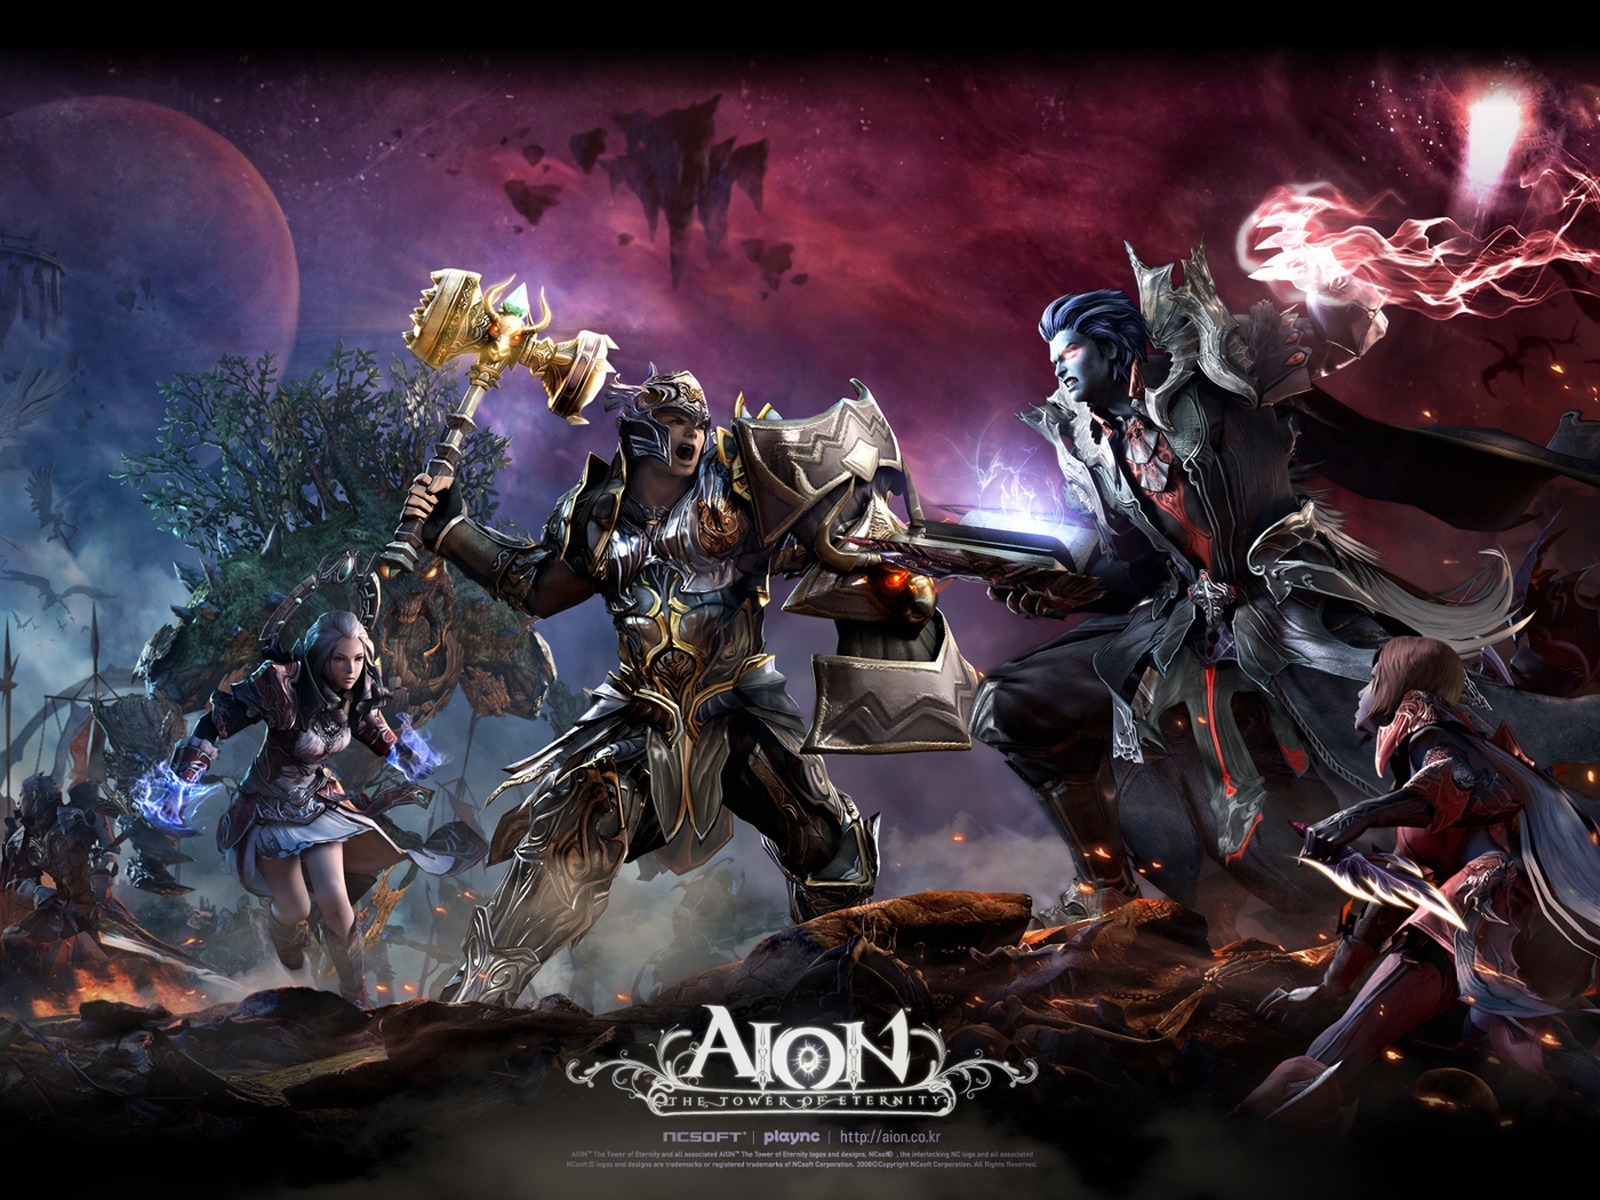 Aion The Tower of Eternity Characters for 1600 x 1200 resolution